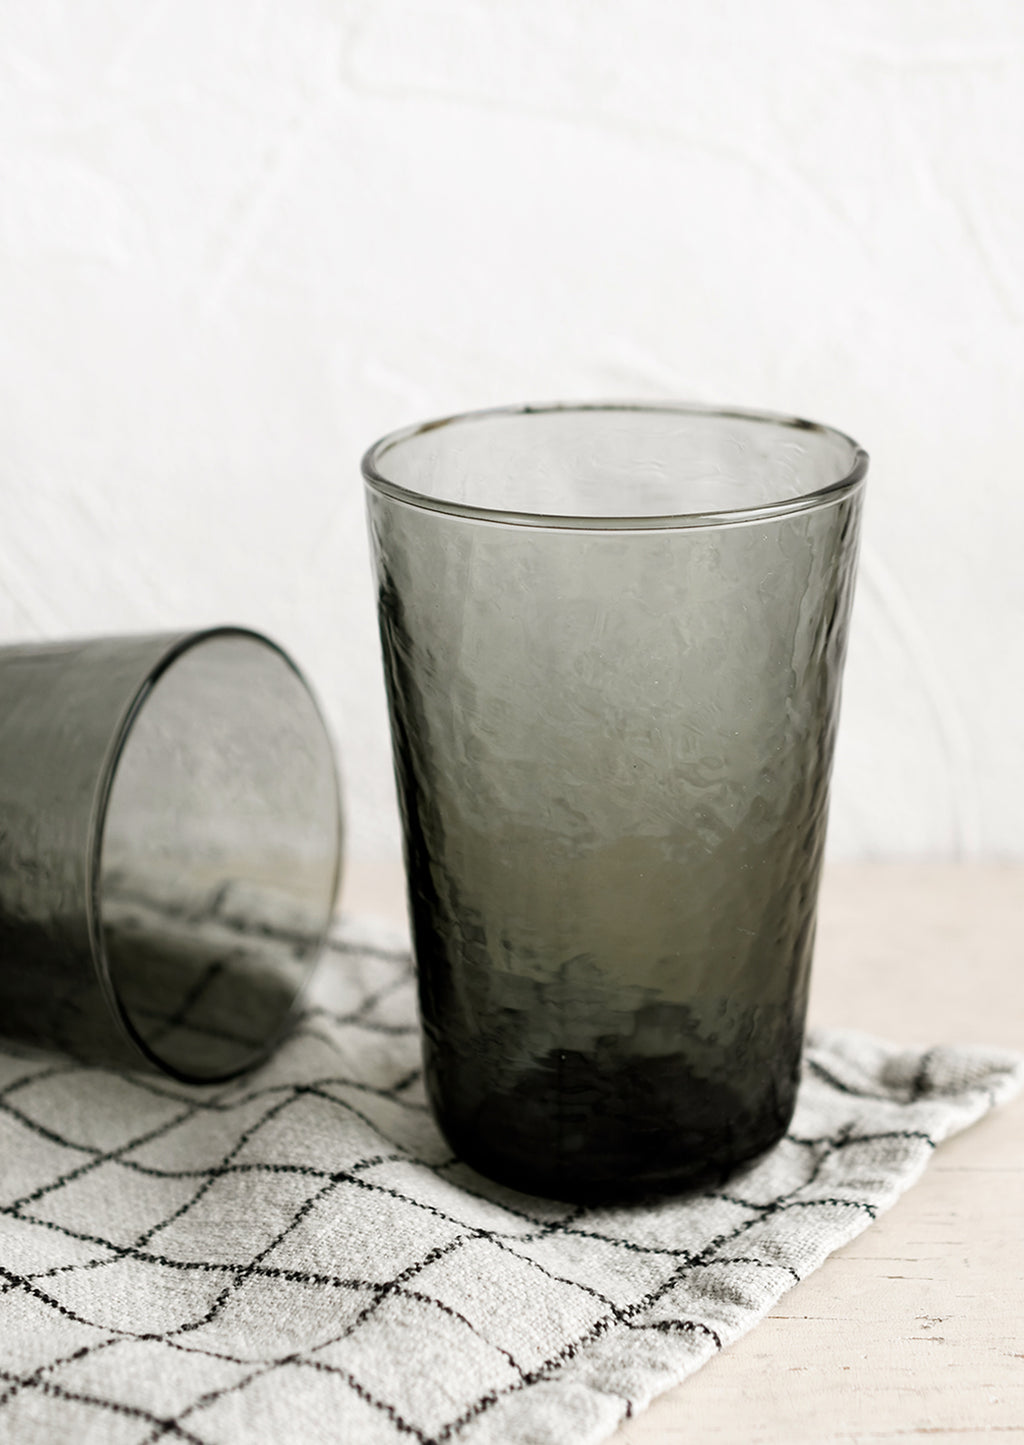 Carbon: A glass tumbler in hammered texture with charcoal tint.